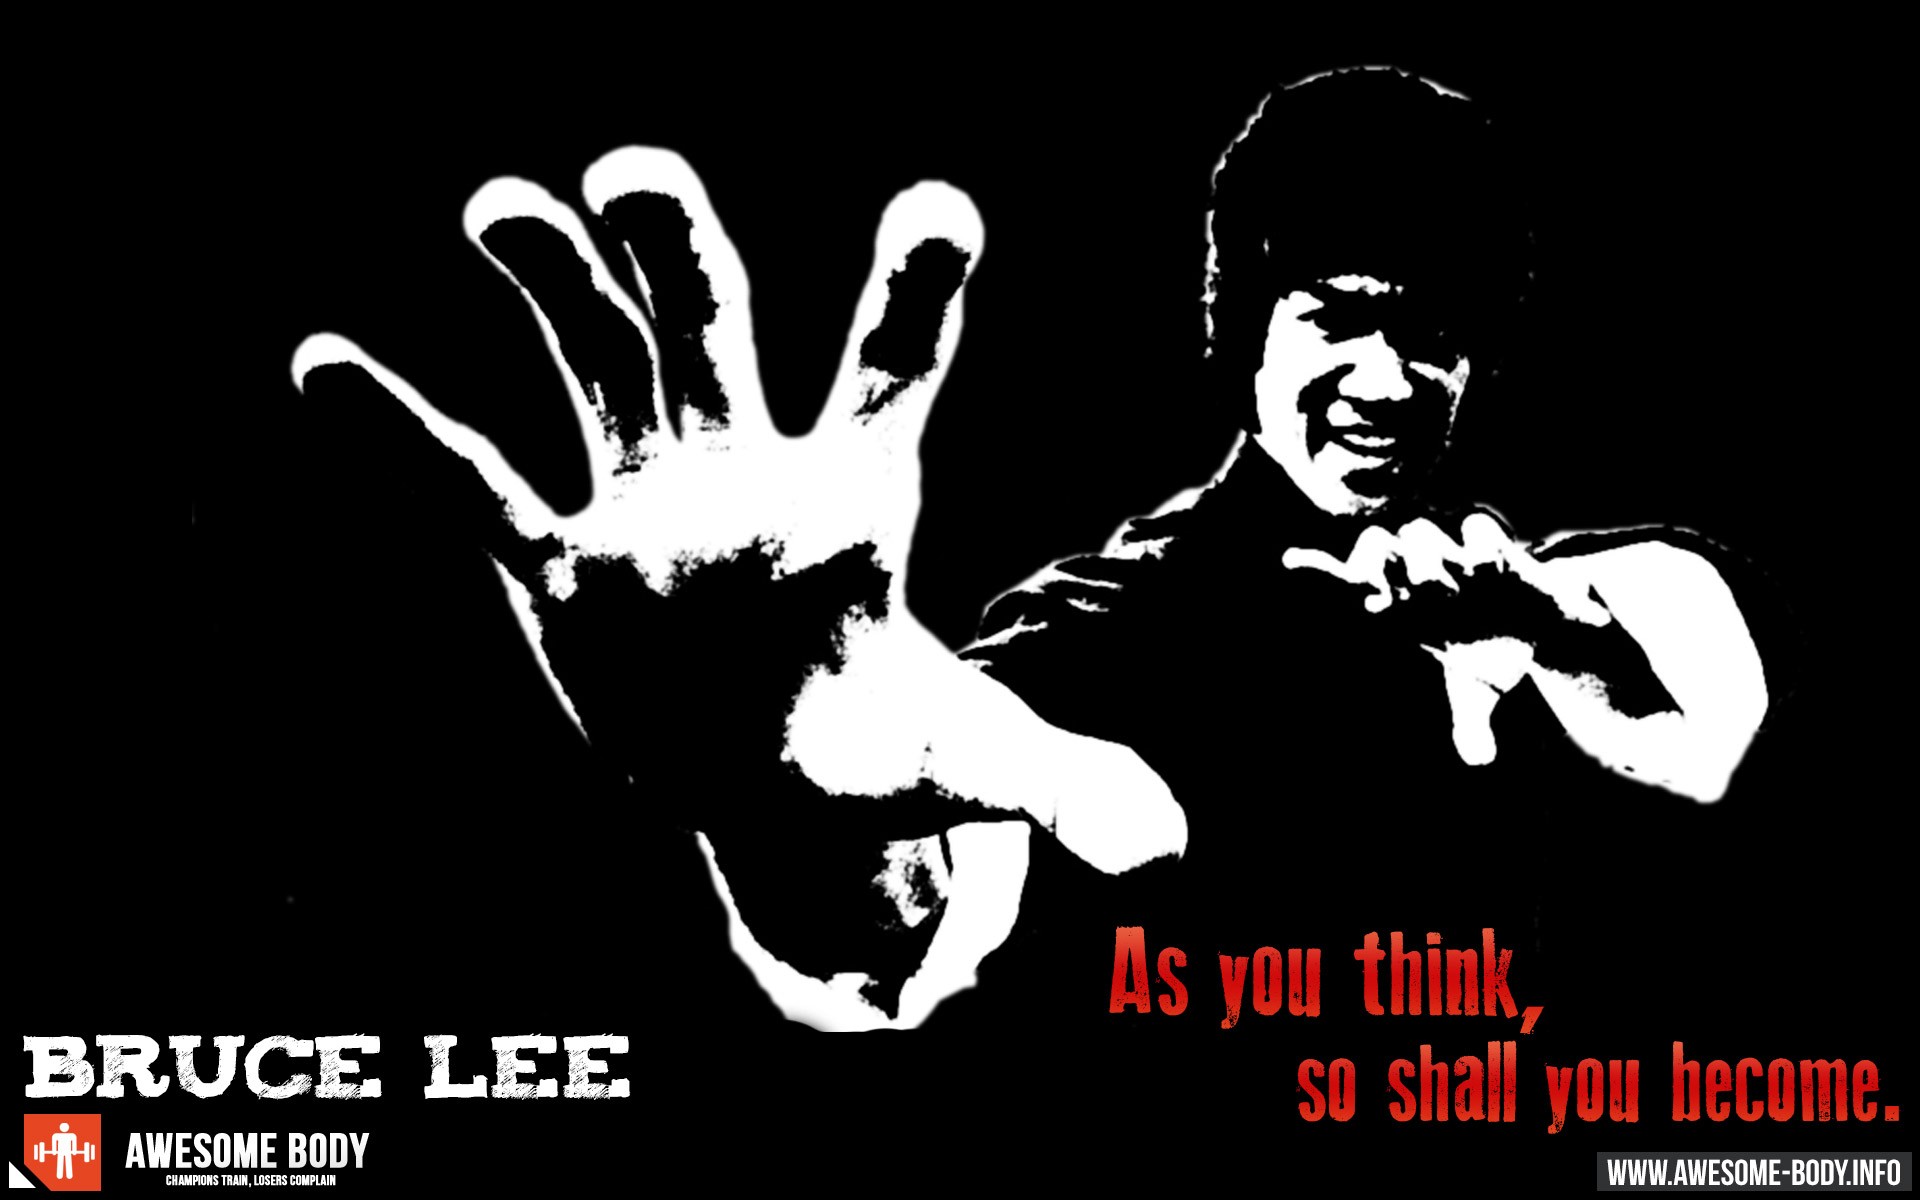 General 1920x1200 skinny Bruce Lee motivational men black background simple background text digital art quote watermarked selective coloring